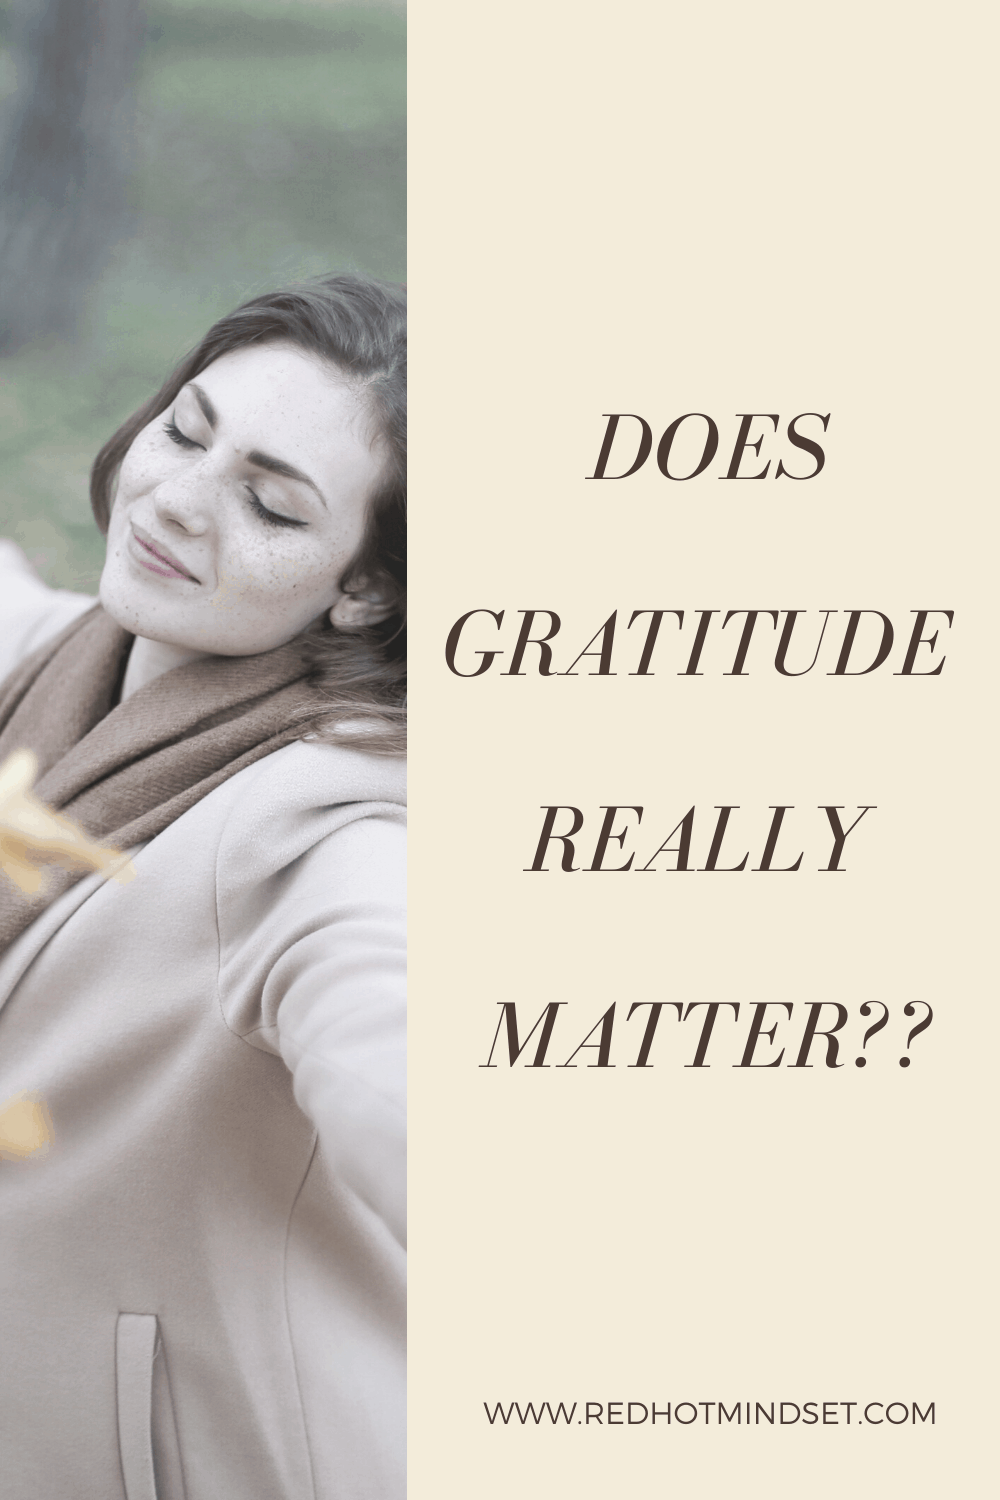 Ep 87 | How Gratitude Became an Essential Part of This Quadruple Amputee’s Life